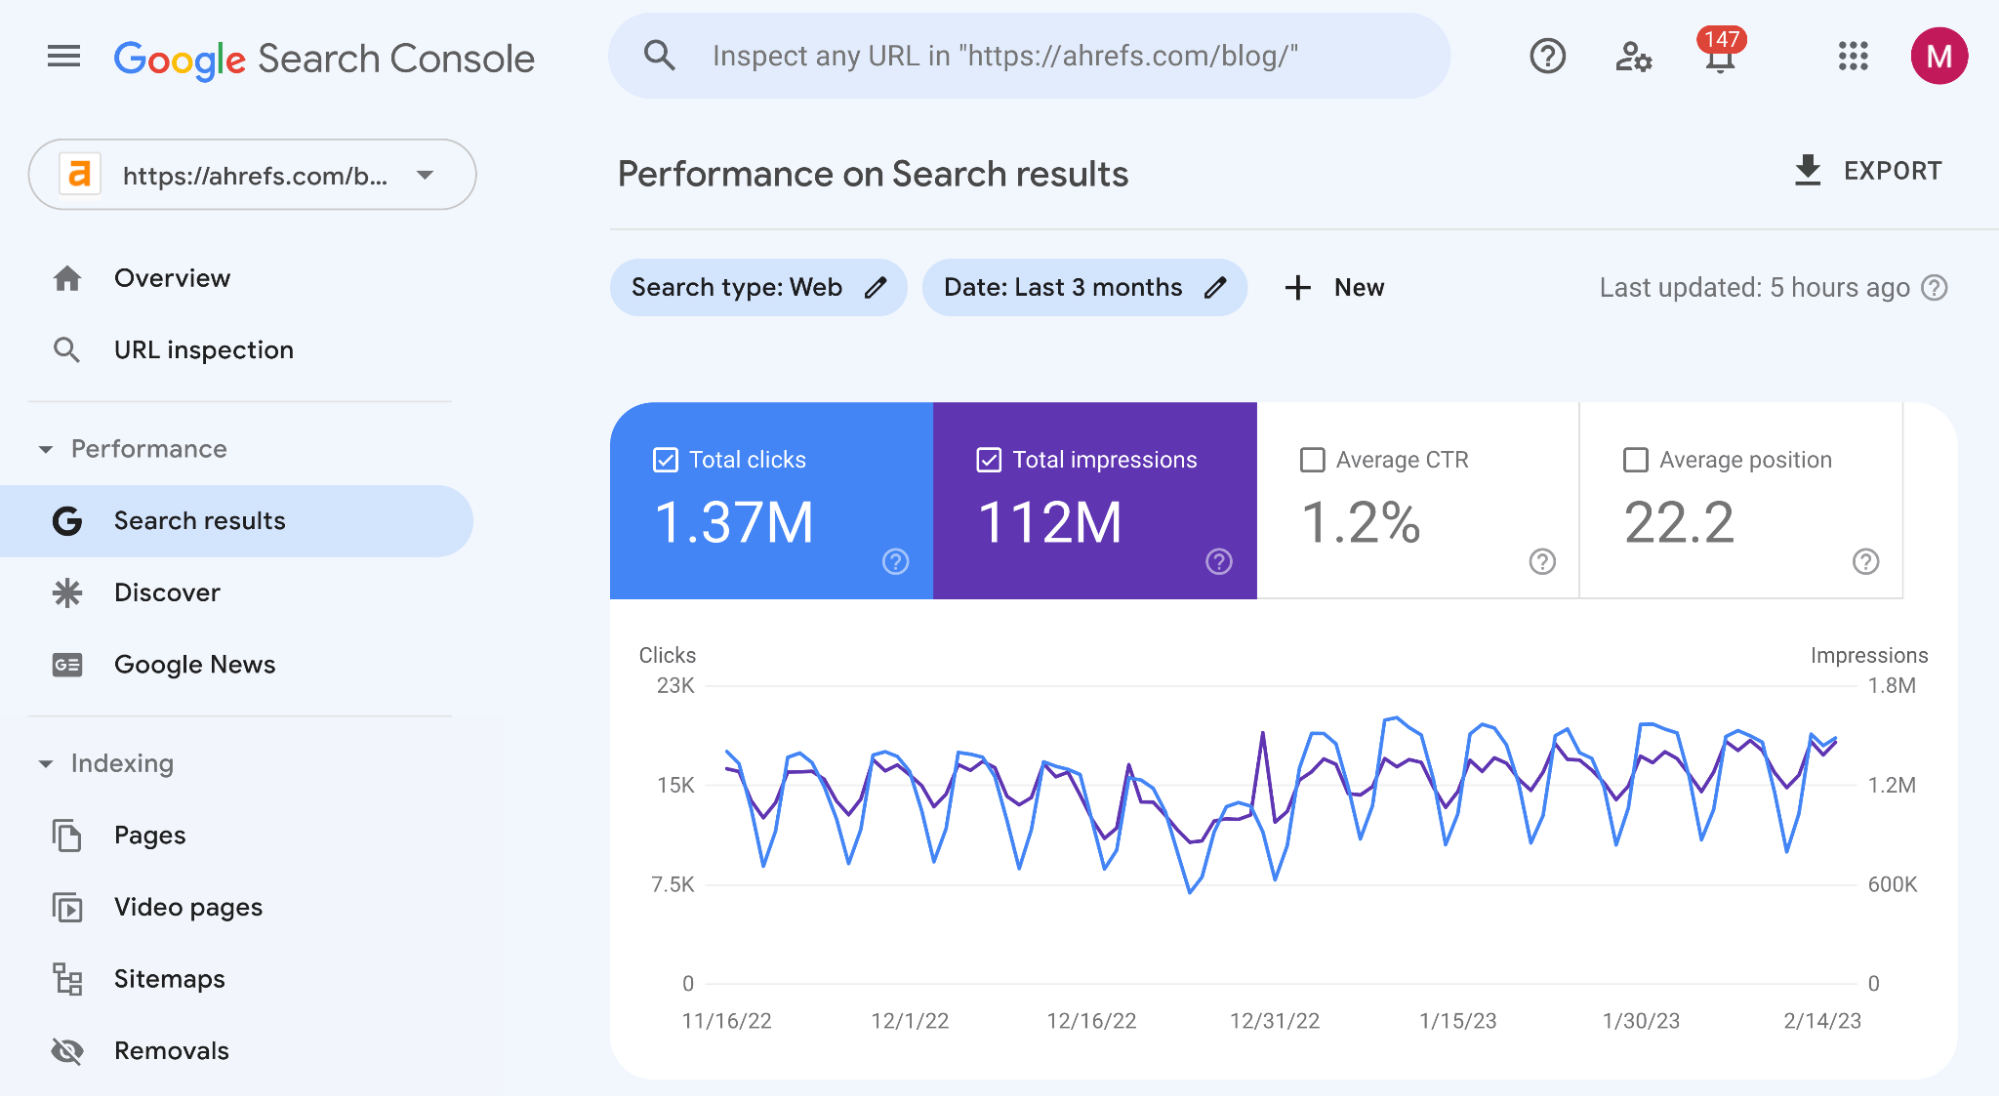 Measuring and Analyzing SEO Performance